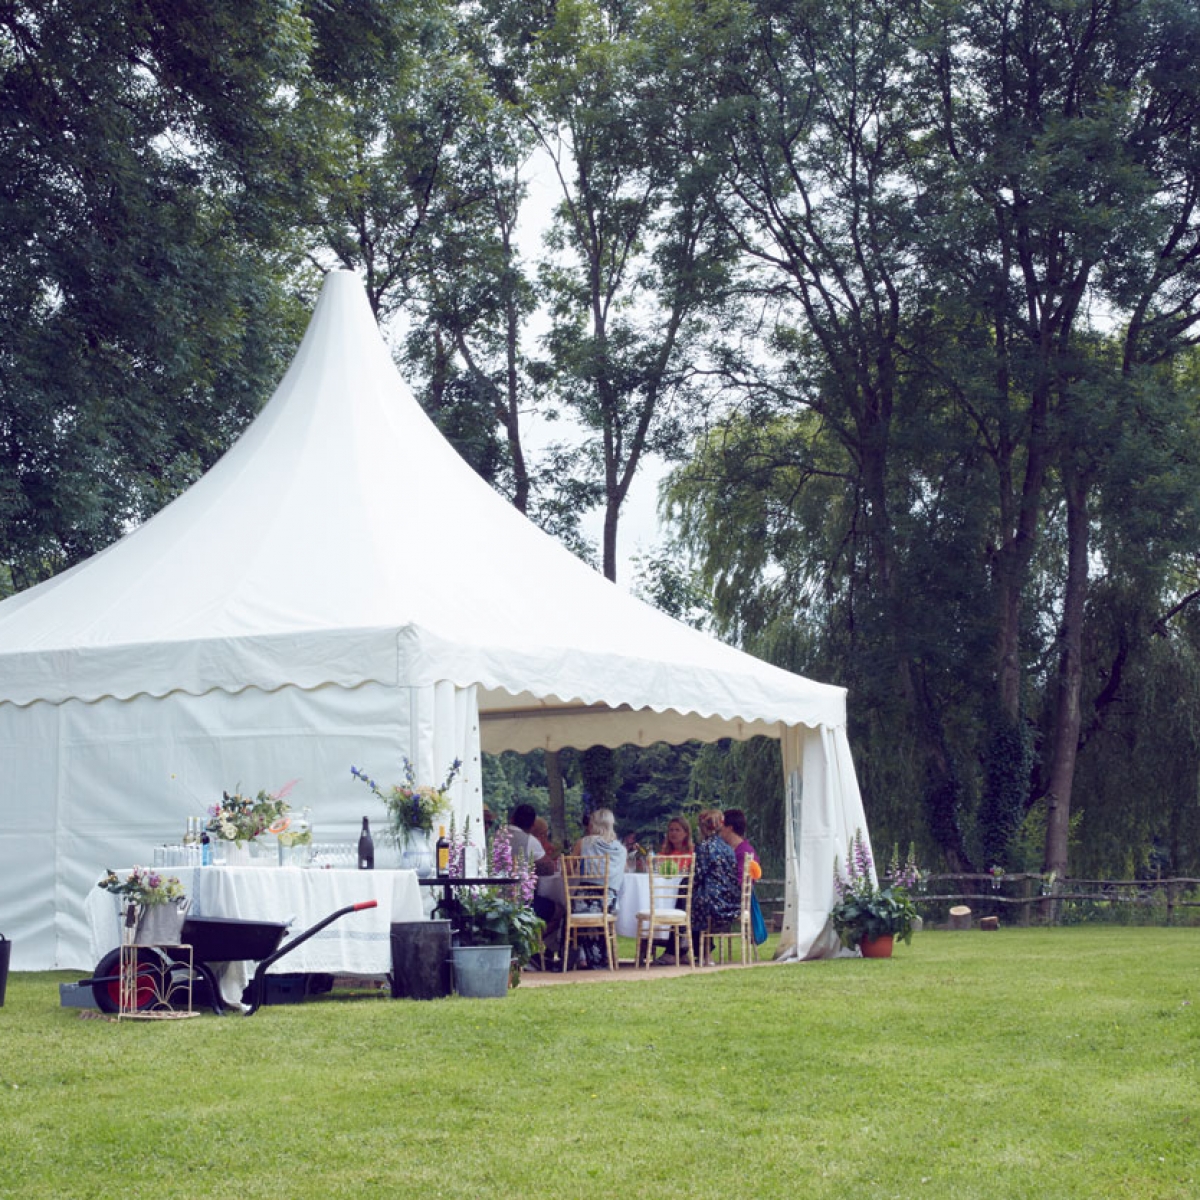 Summer garden party marquee is the perfect size for a realxed summer garden party. The chinese hat marquee seats up to 30 people easily